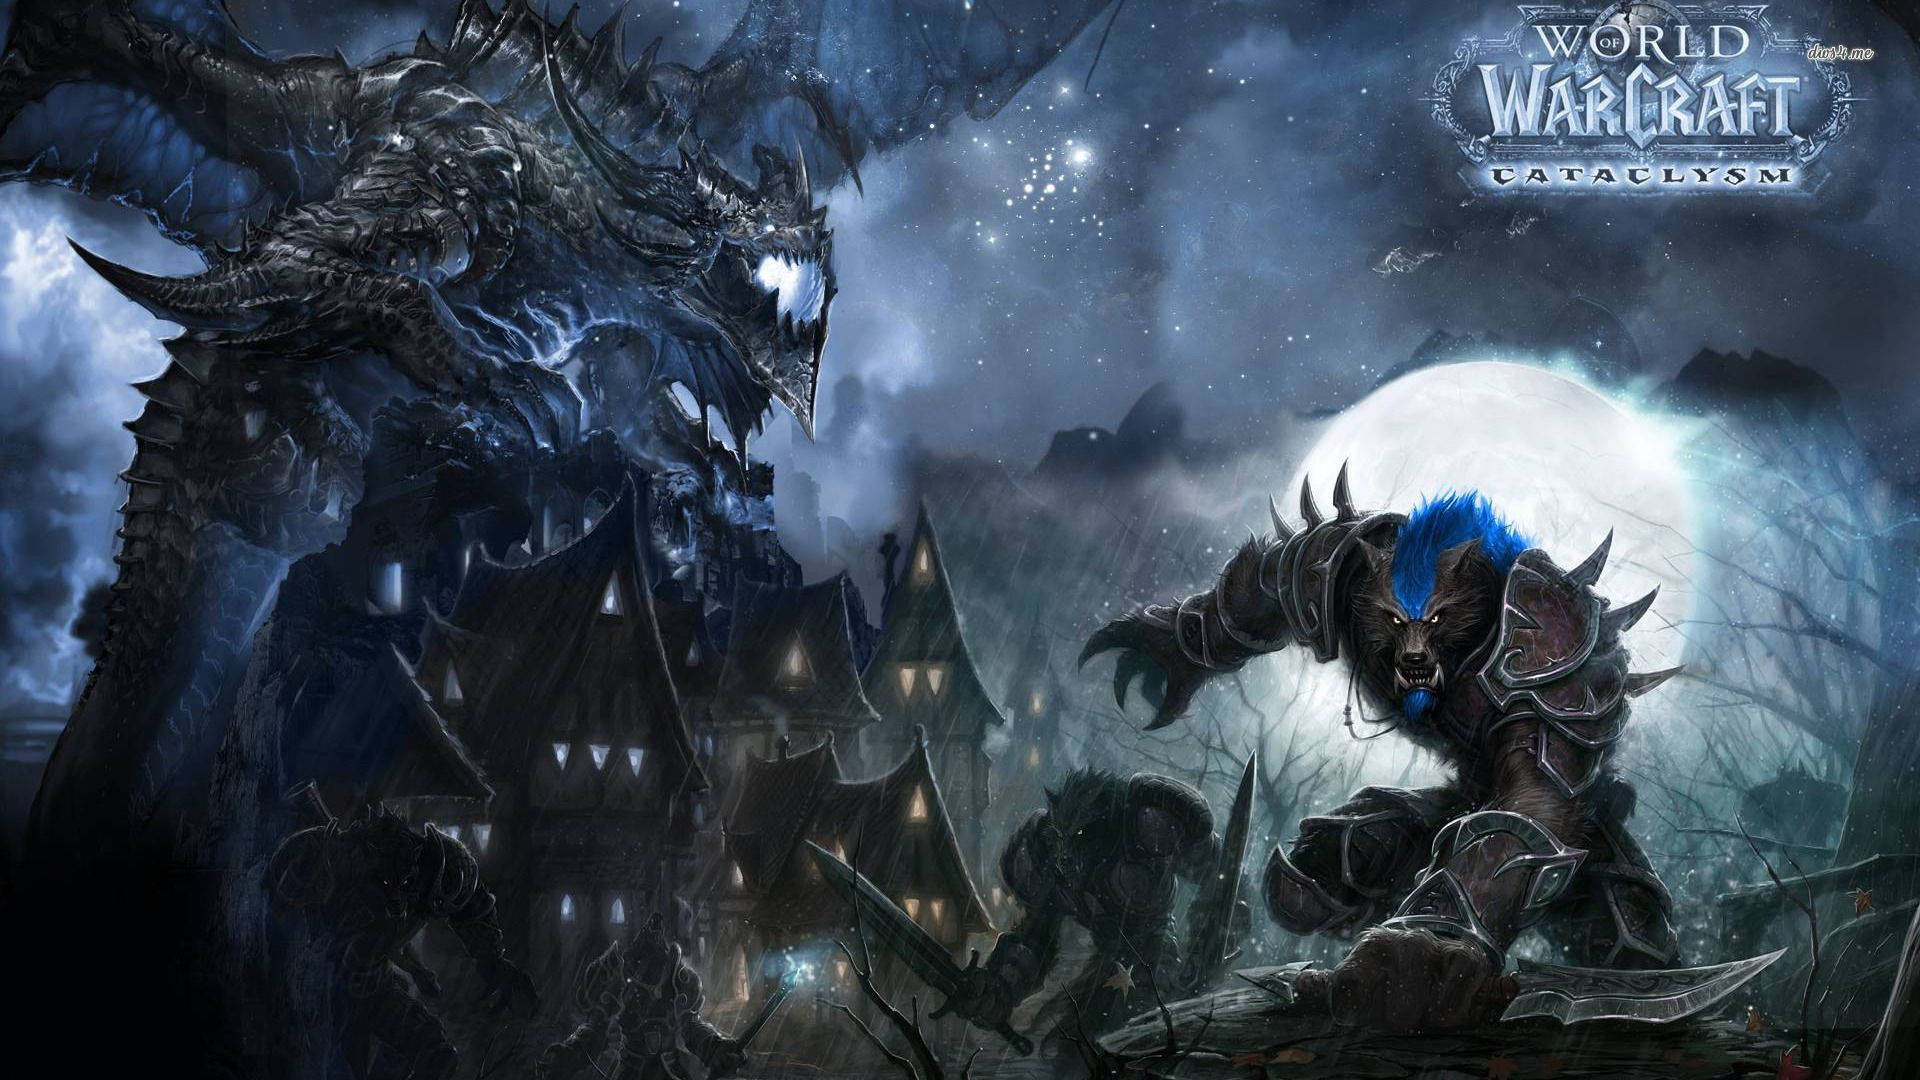 One Of The Fiercest Races In World Of Warcraft - The Worgen Wallpaper